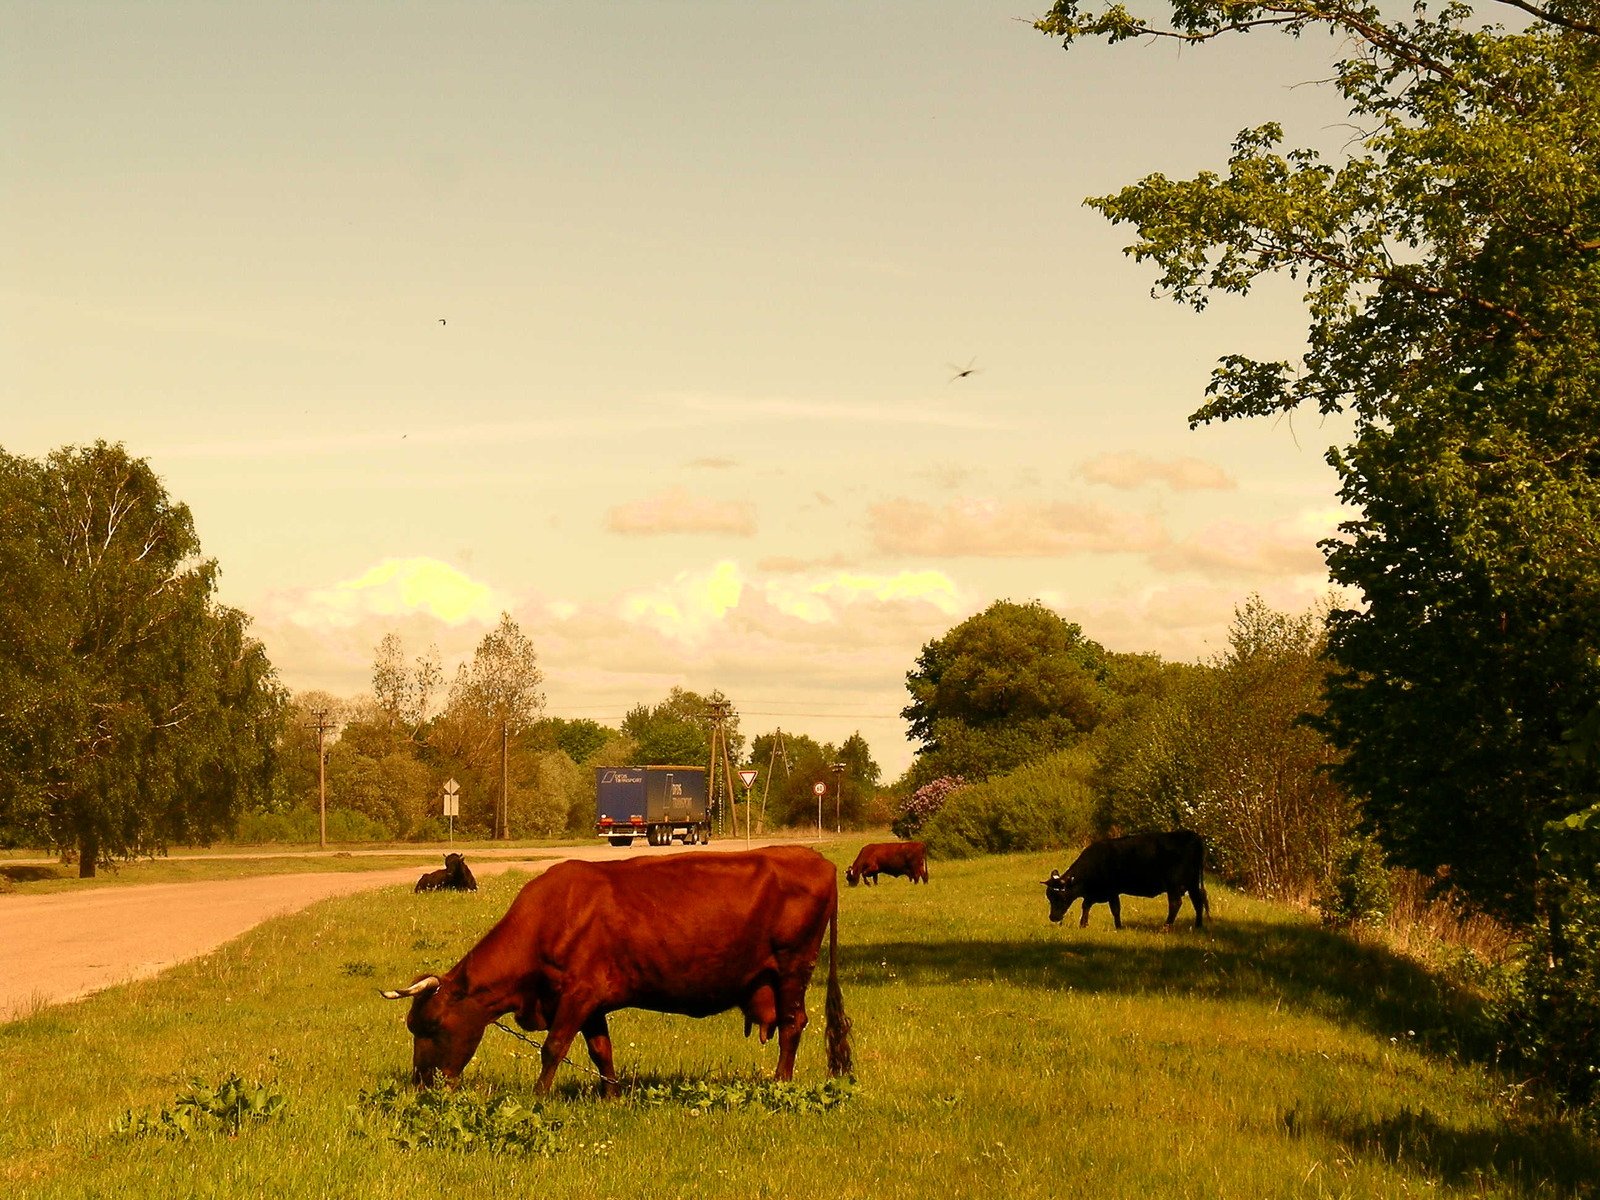 cows are standing in the grass next to a road